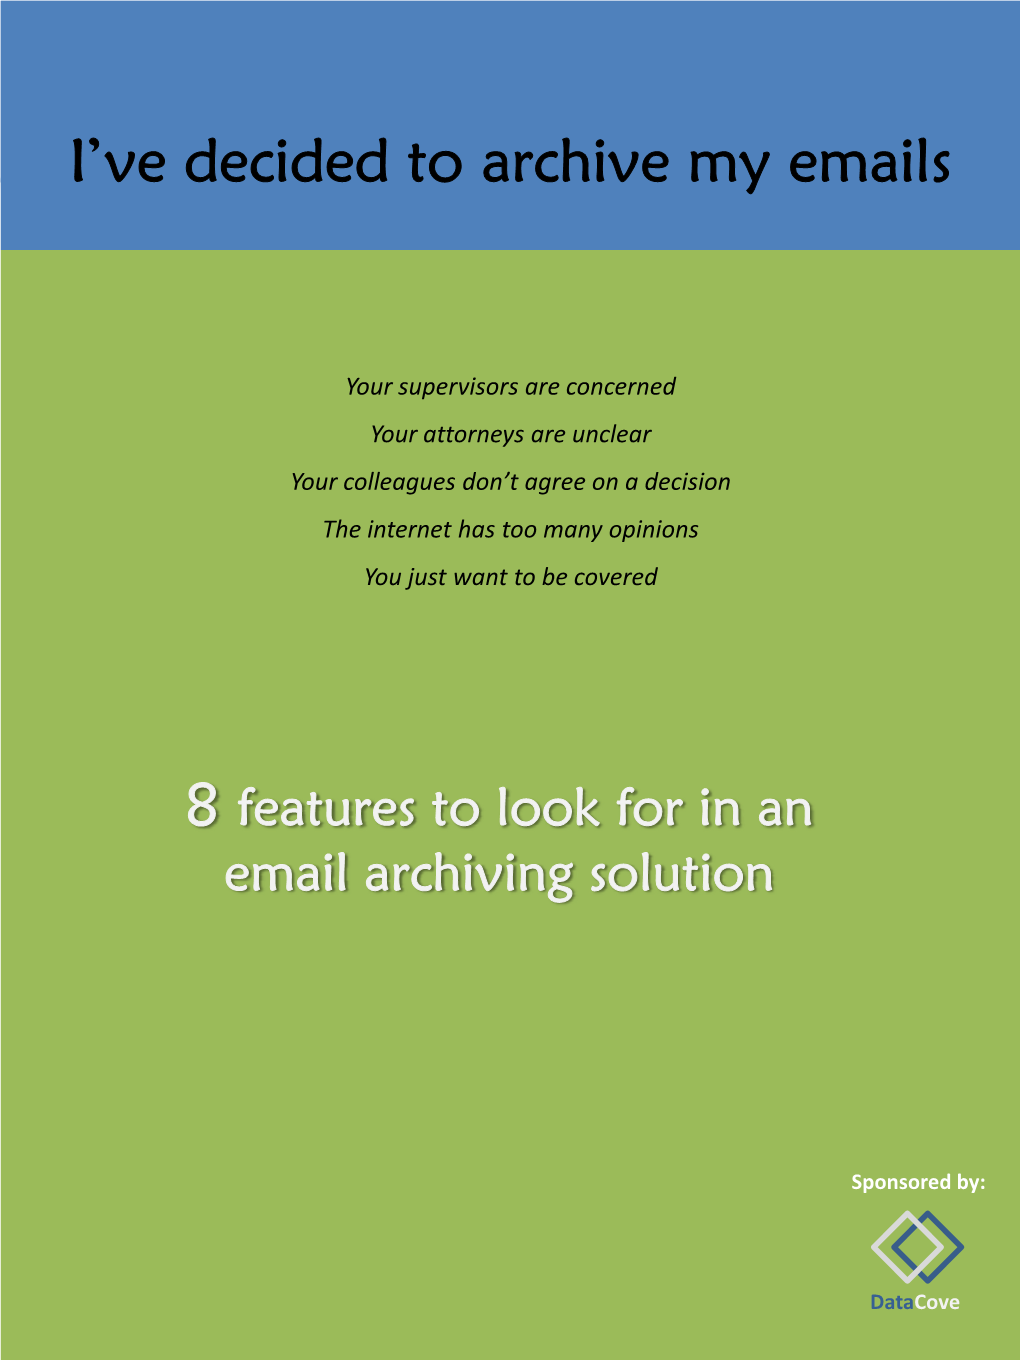 Datacove I’Ve Decided to Archive8 Features to Look My for in an Emailemails Archiving Solution